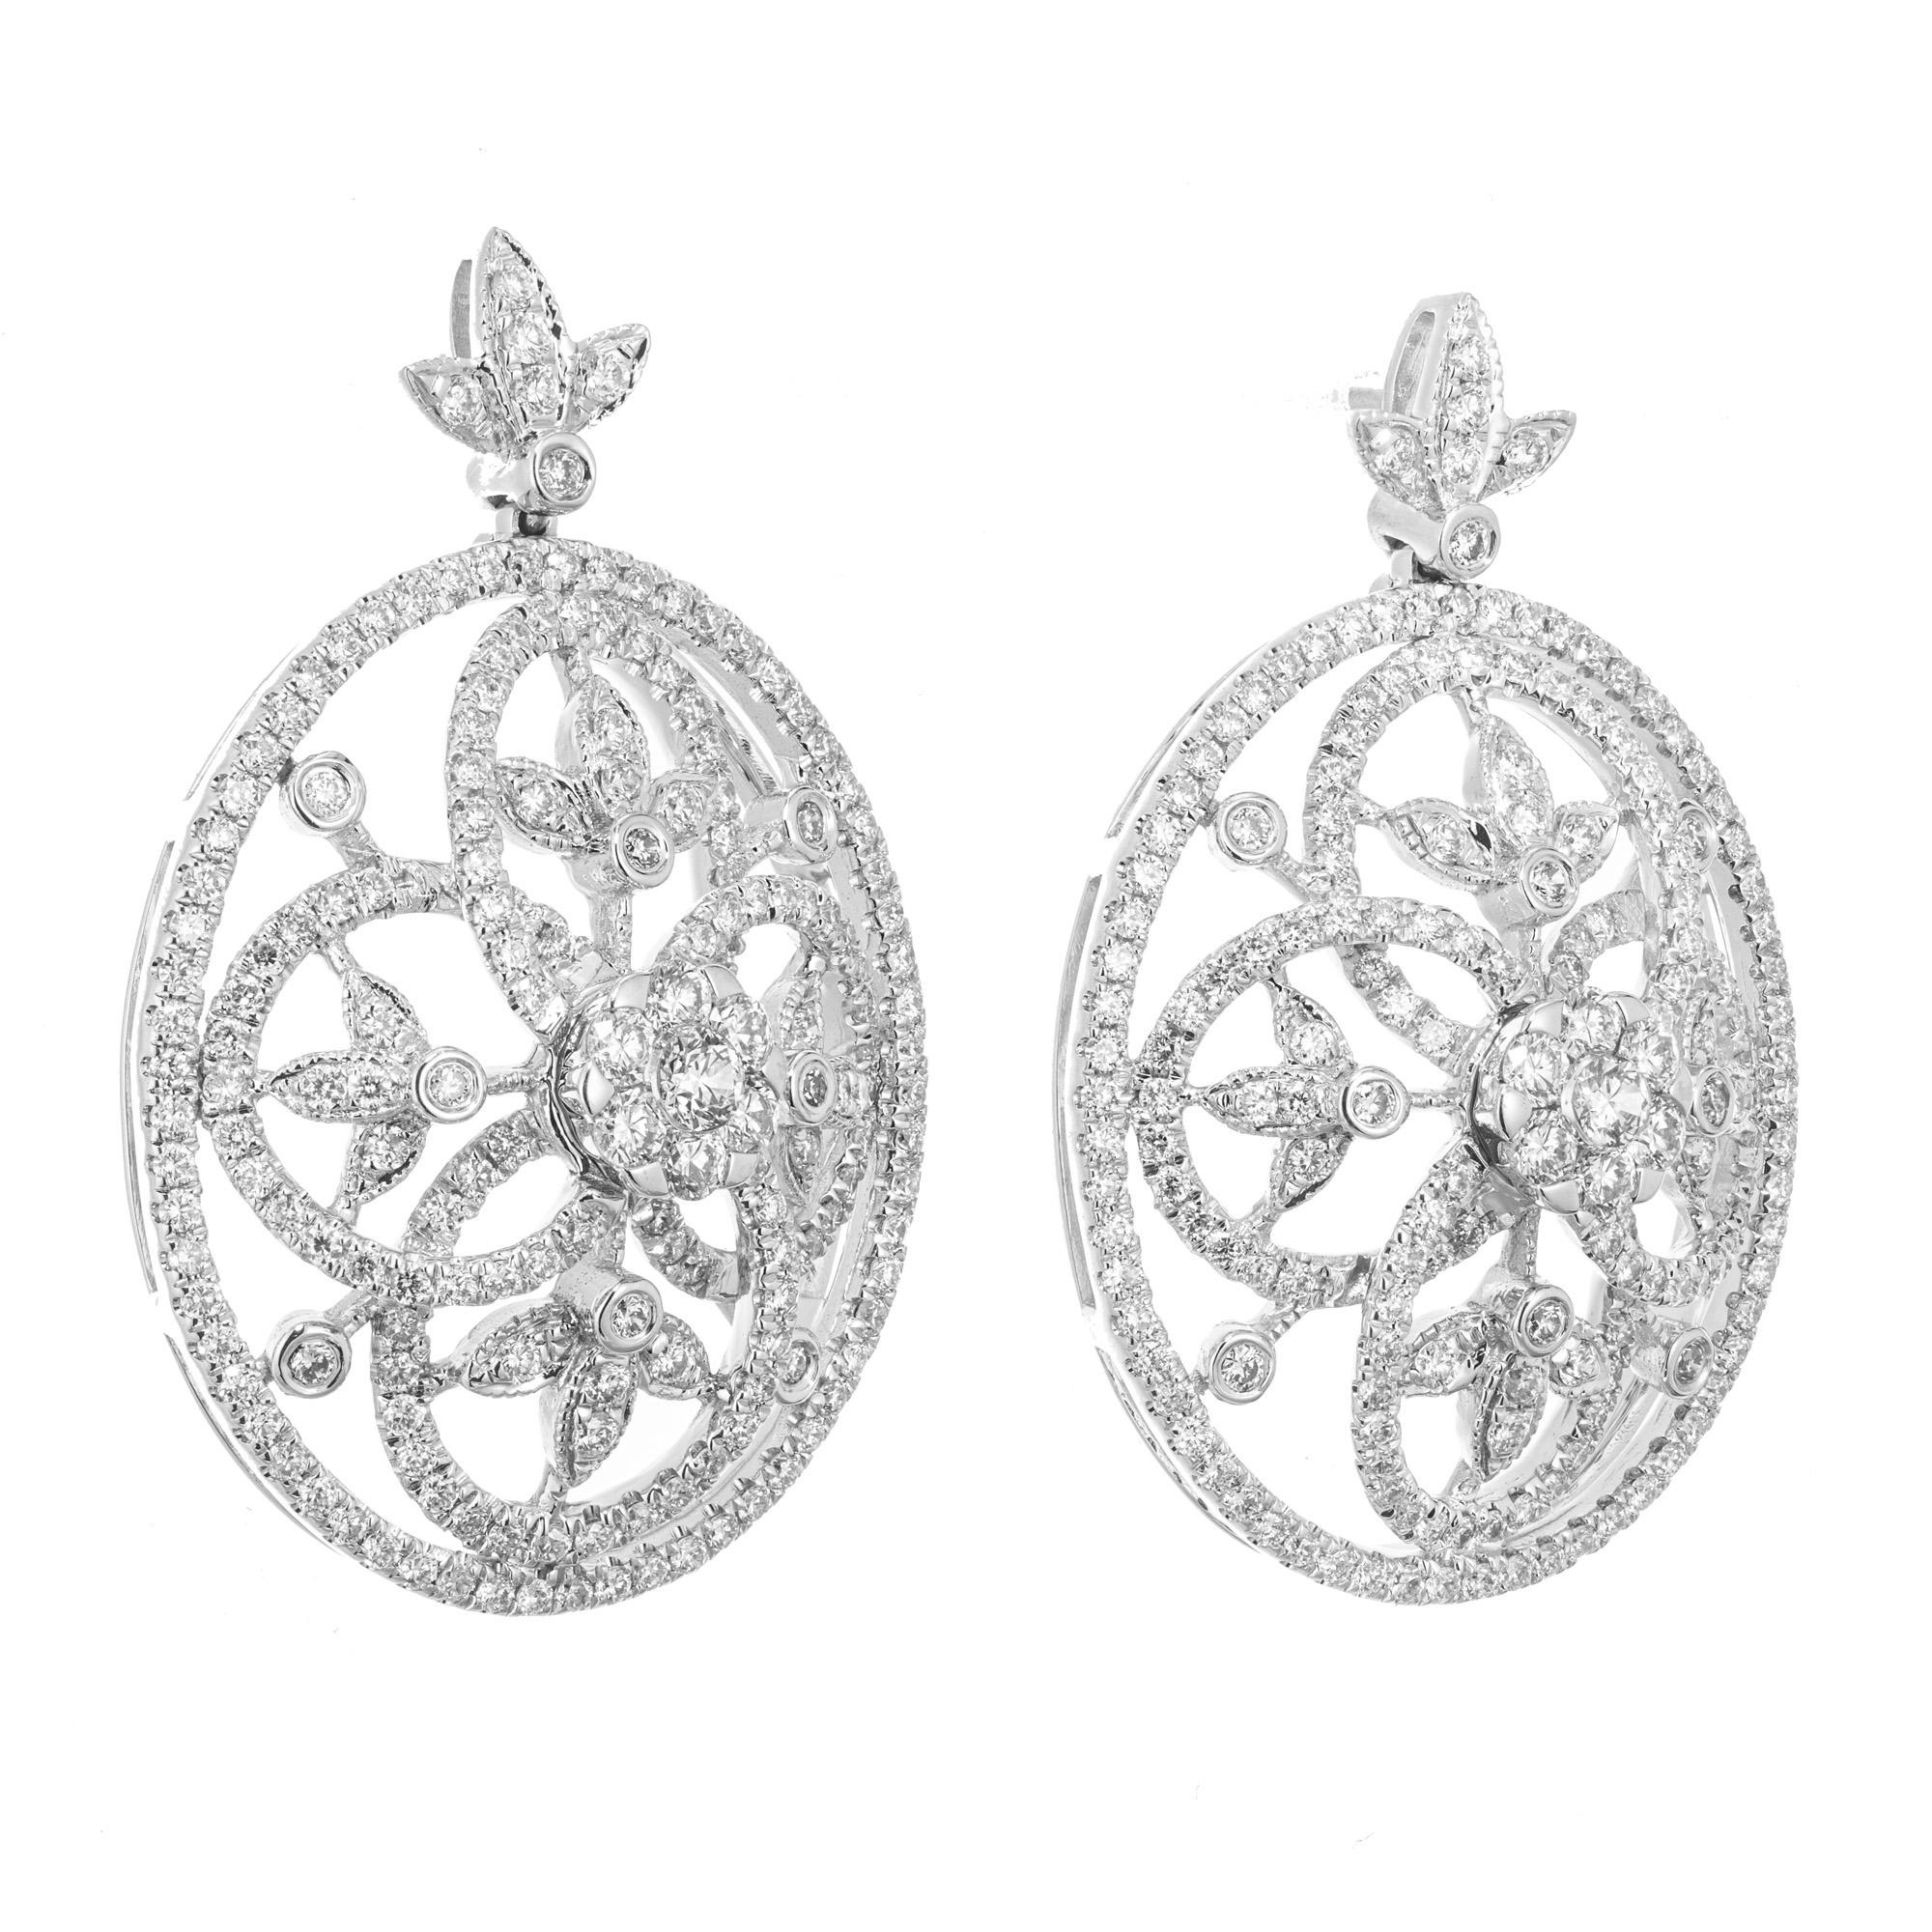 Spectacular open swirl diamond dangle earrings. Oval shaped 14k white gold raised dome framed settings with 374 round brilliant cut diamonds totaling 1.75cts. Each dangle has detailed inside swirls of diamonds making these earrings truly